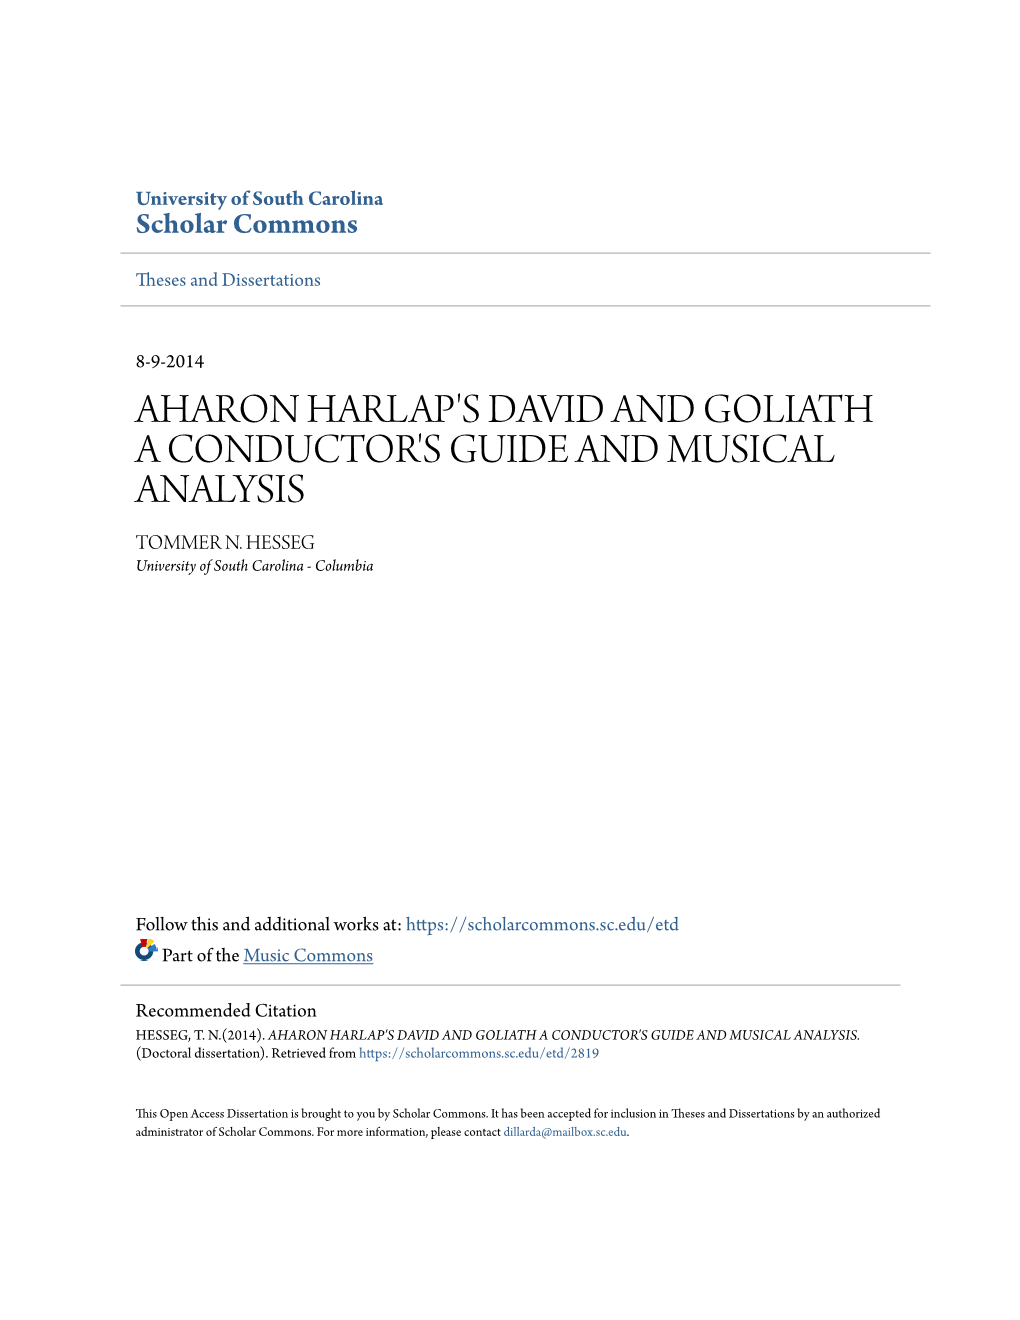 Aharon Harlap's David and Goliath a Conductor's Guide and Musical Analysis Tommer N